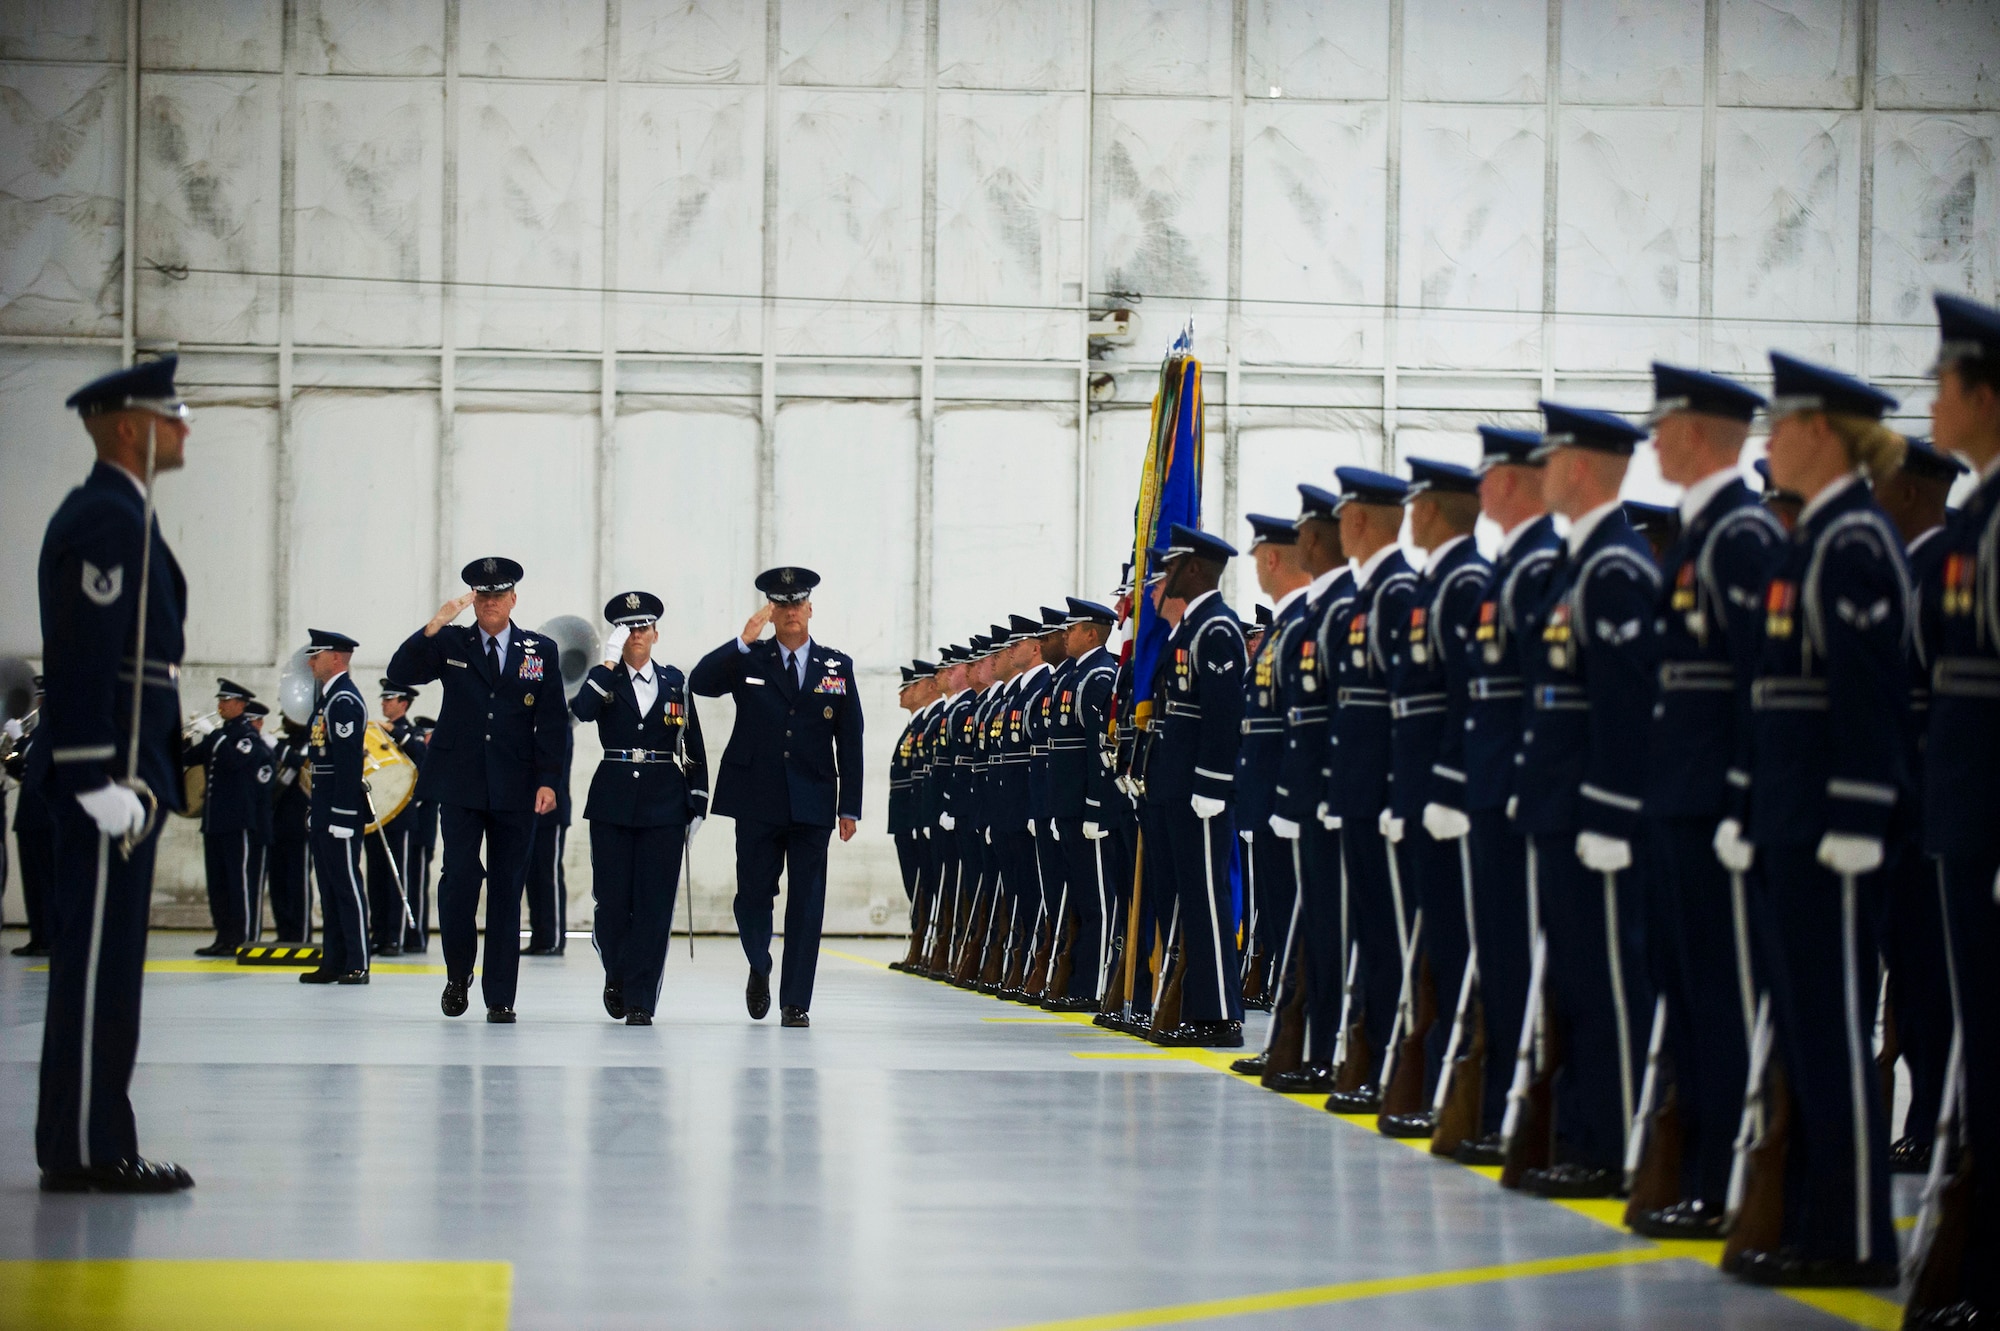 Maj. Gen. Darryl Burke and Maj. Gen. James Jacobson inspect the troops during the Air Force Dostrict of Washington Change of Command ceremony on Joint Base Andrews, Md. June 20, 2017. Air Force Vice Chief of Staff Gen. Stephen Wilson presided over the ceremony where Burke relinquished command to Jacobson.  (Photo by Senior Master Sgt. Adrian Cadiz)(Released)